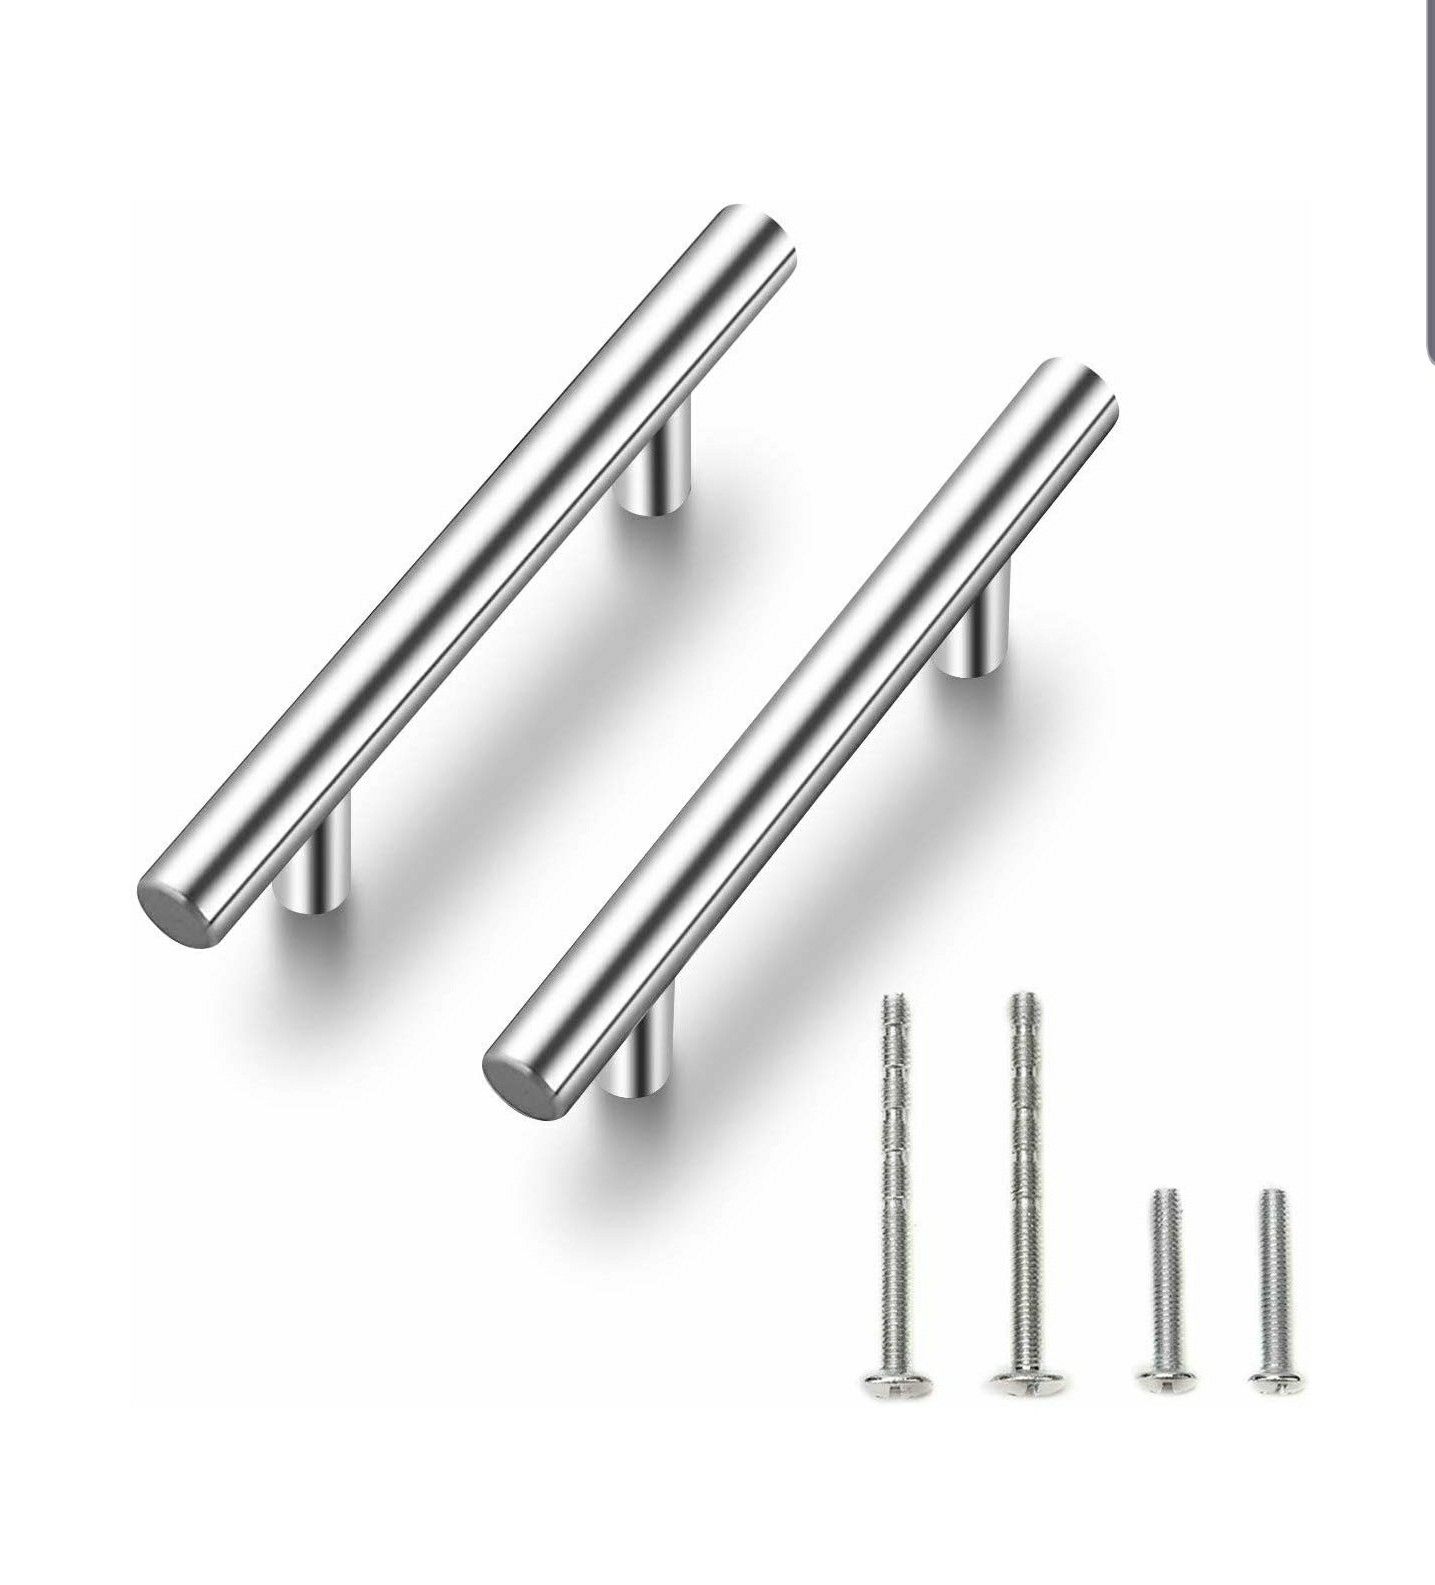 New Stainless steel Kitchen Handles 6in 15pk